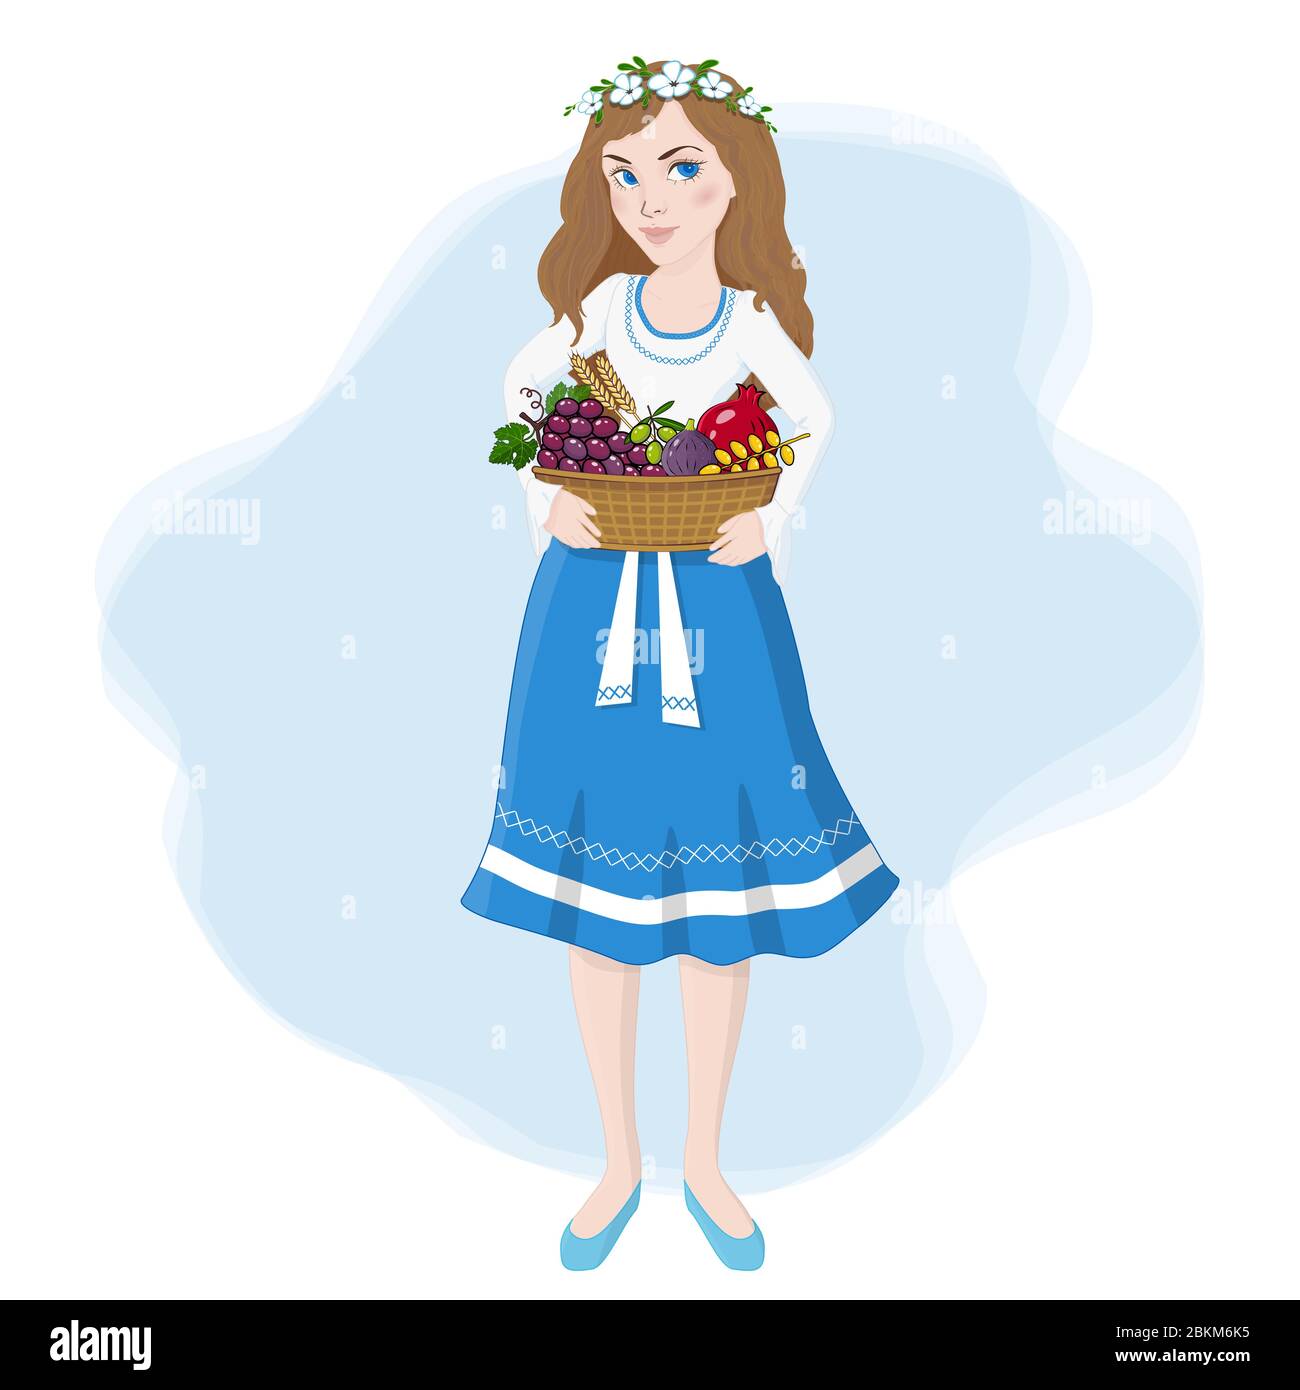 Girl holding a basket of traditional fruits, vegetables and crops. Stock Vector